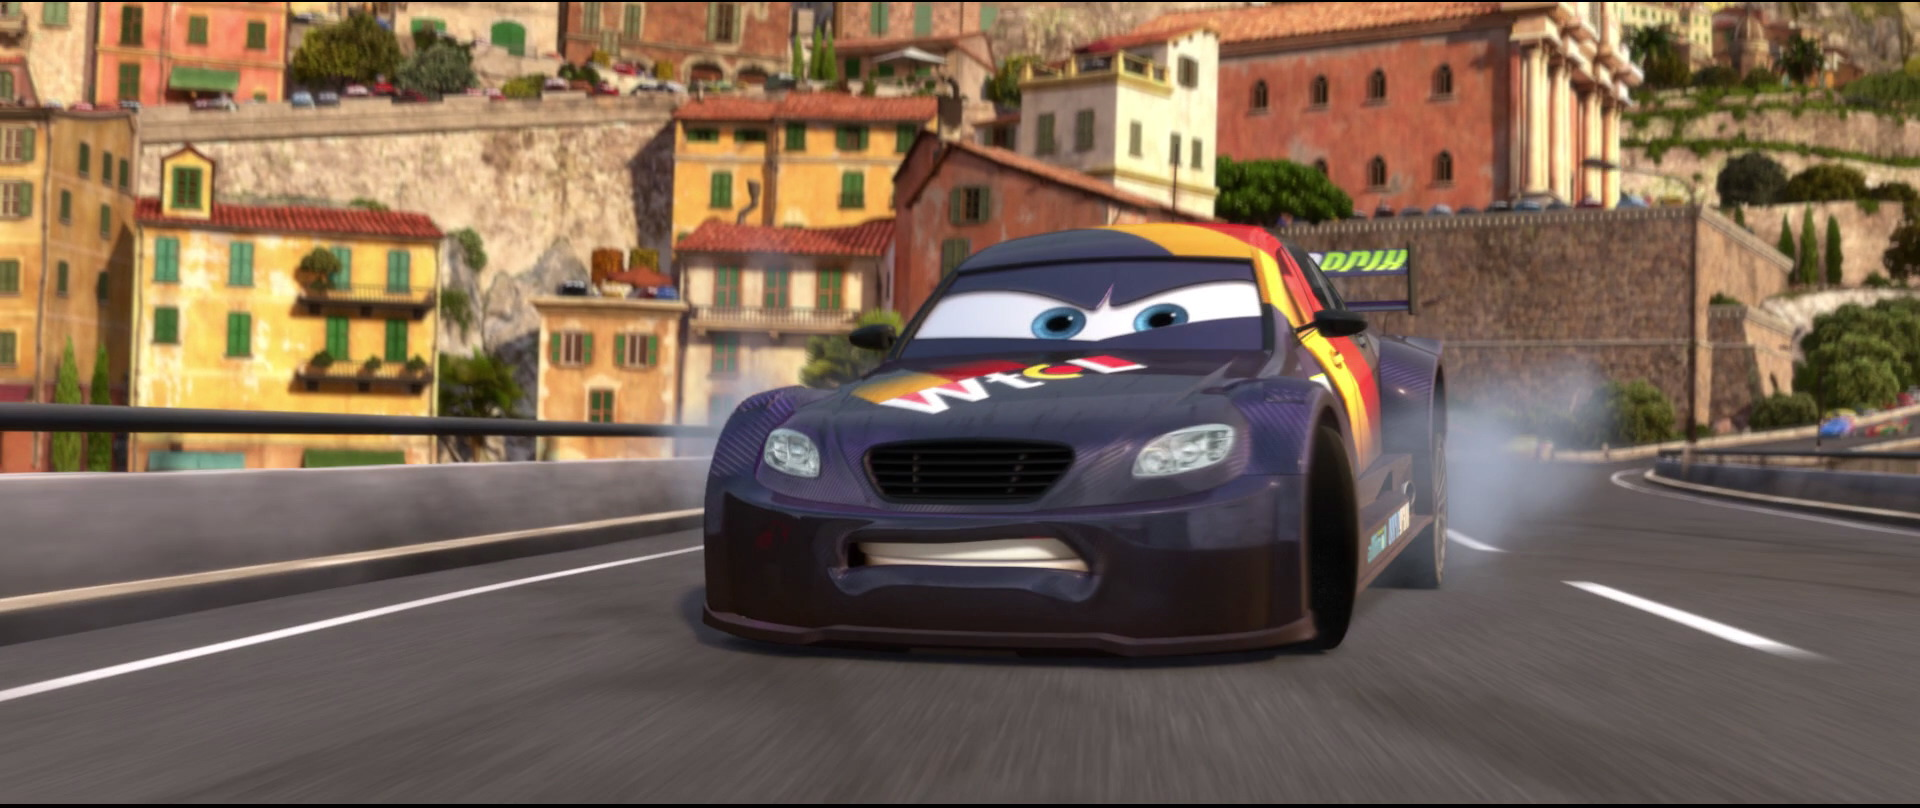 cars 2 the video game max schnell download